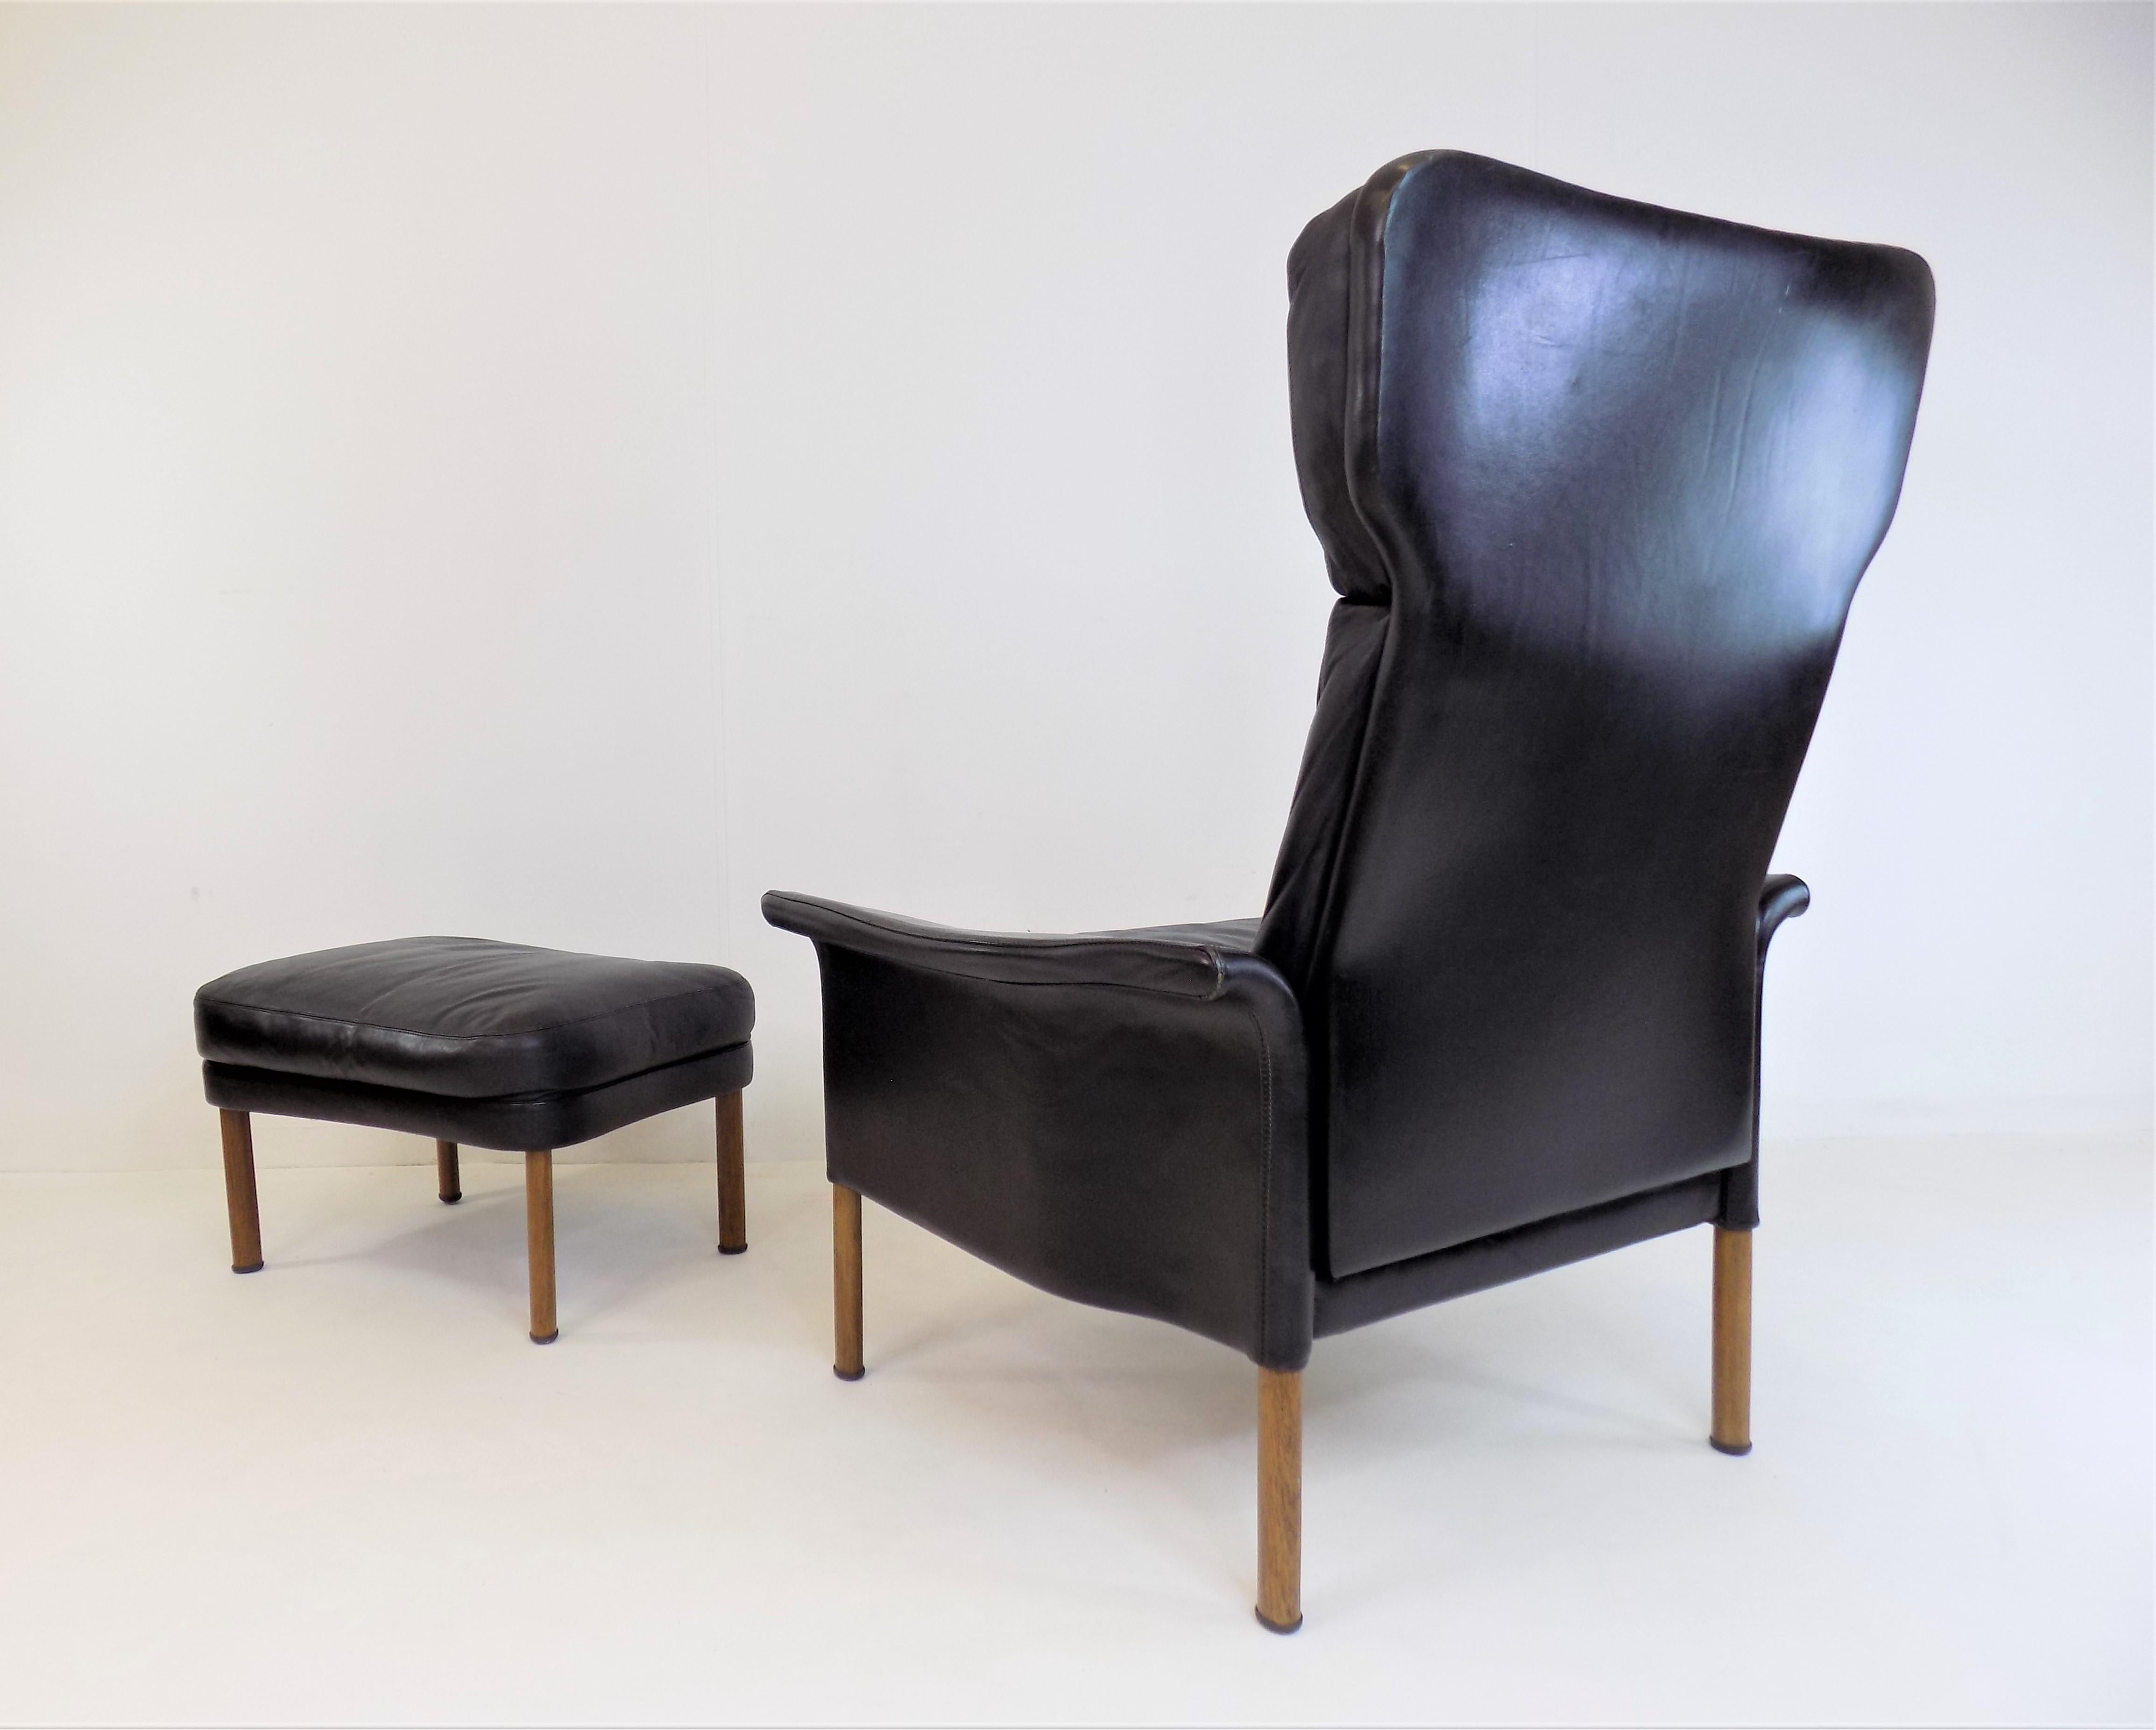 The leather armchair in black leather comes in very good condition with a light patina. The leather of the armchair as well as the Ottoman are soft, without major signs of wear, with a light patina on the corners of the armrest and the backrest. The